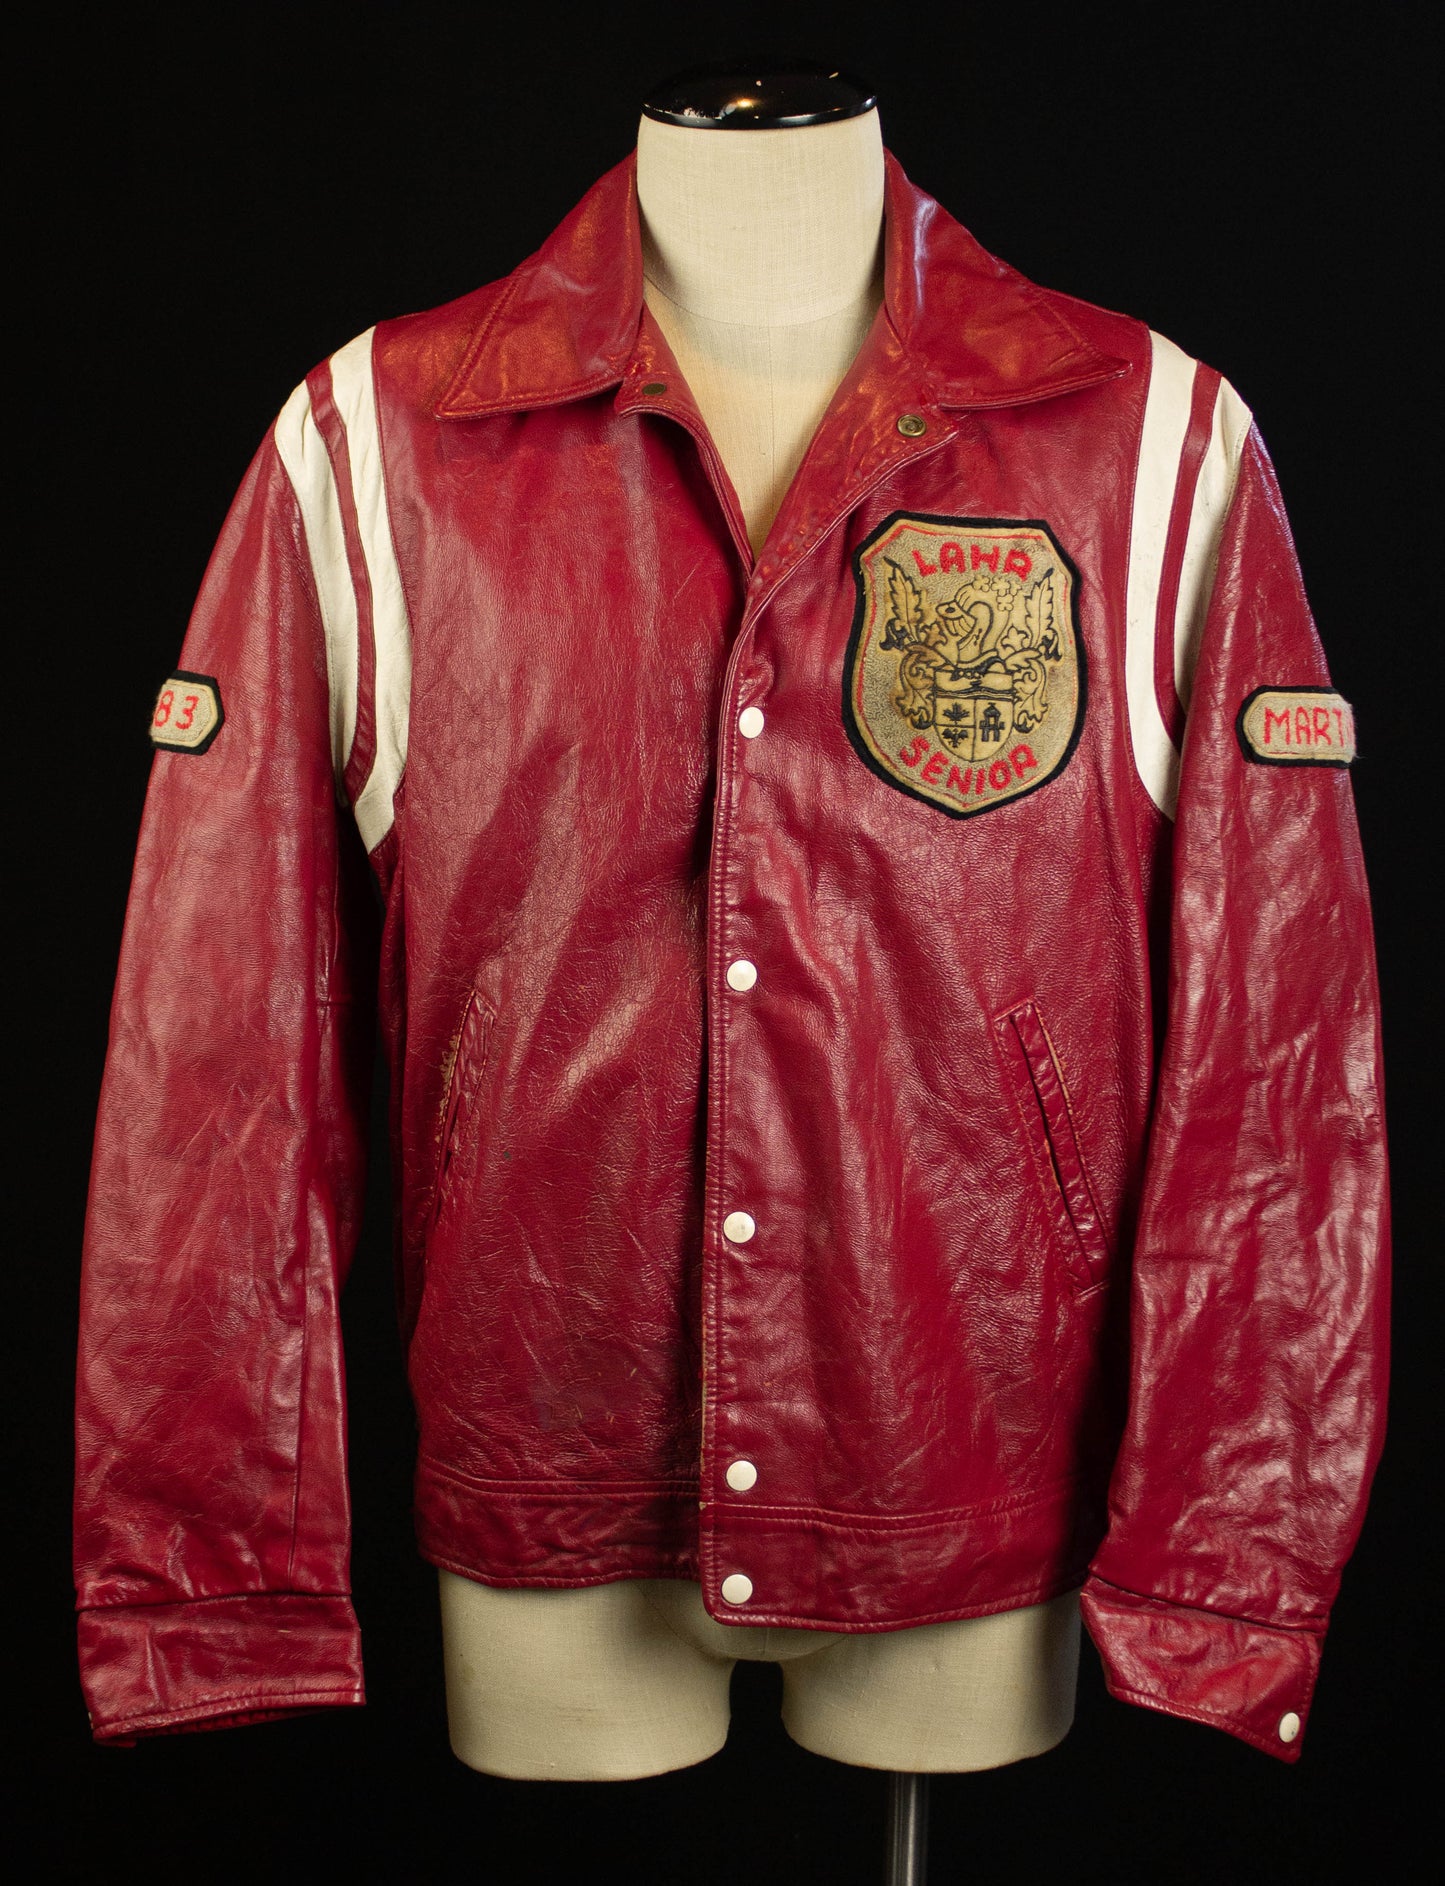 Vintage Germany Letterman Varsity Leather Jacket 1981 LAHR Senior Red and White Patches Large-XL